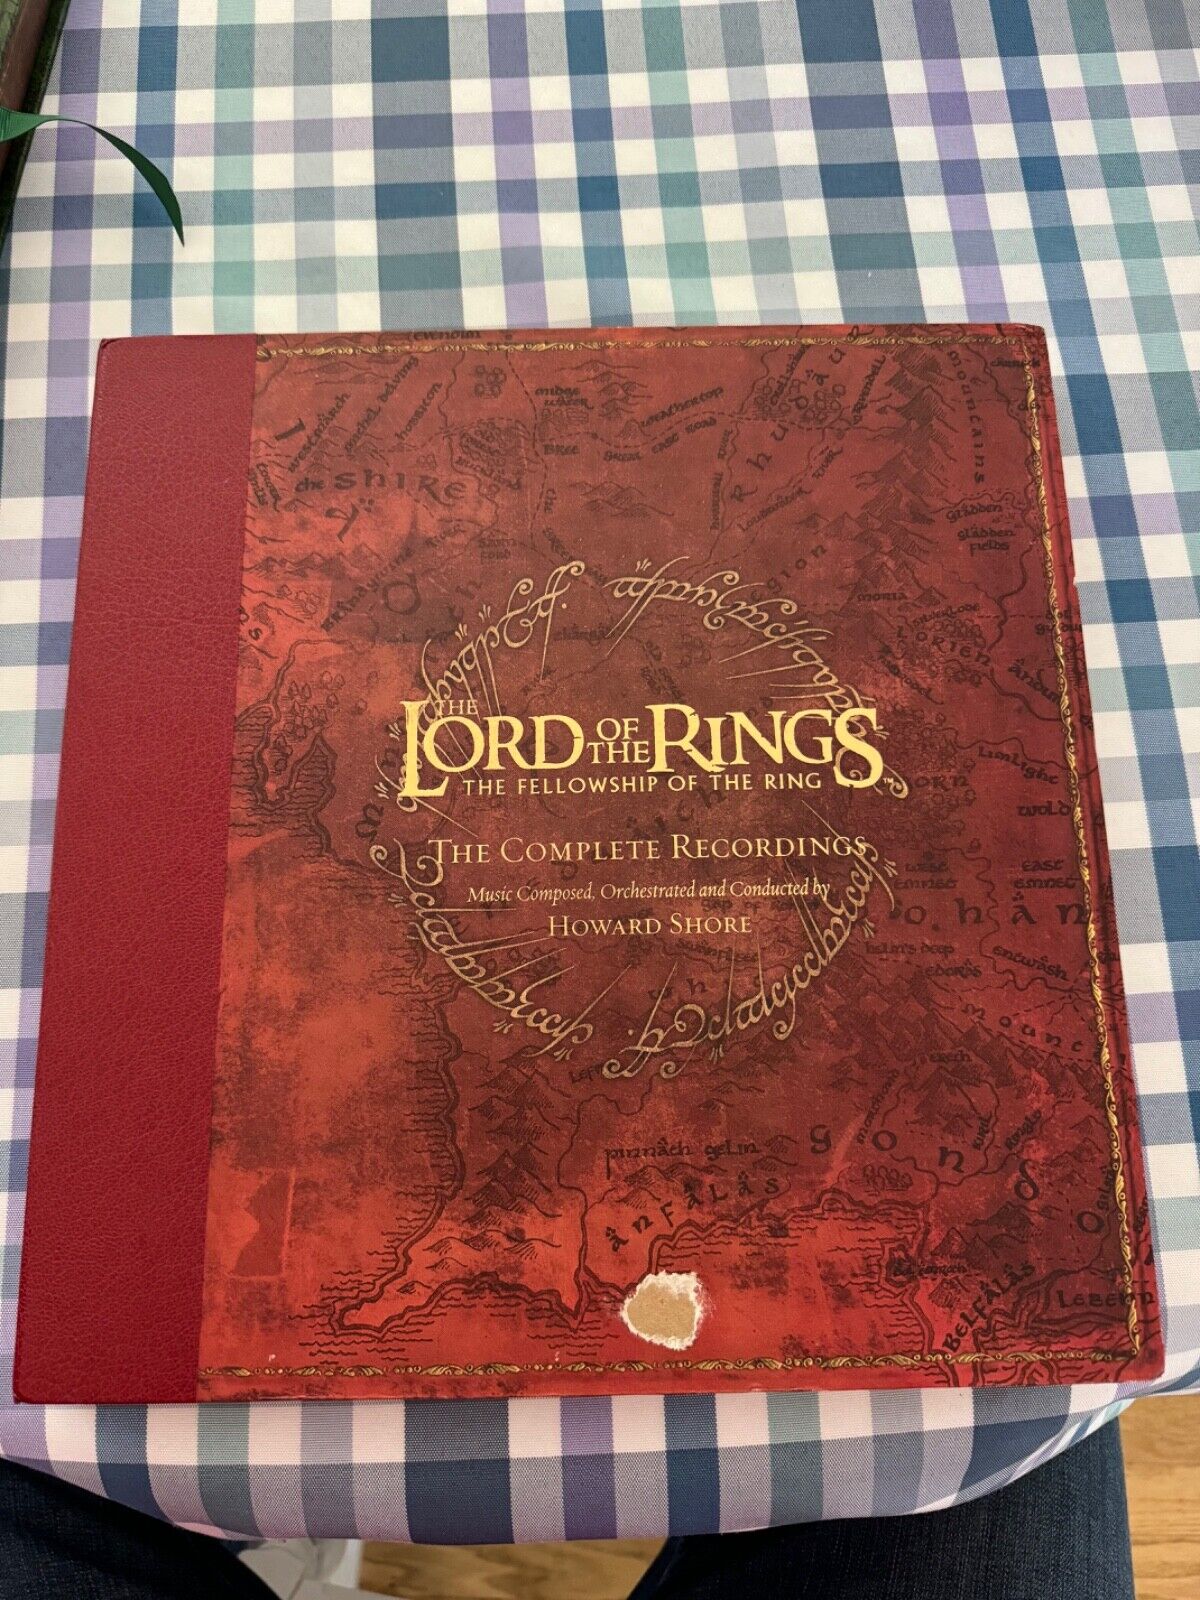 Lord of the Rings Vinyl Soundtrack, fellowship, return of the king.